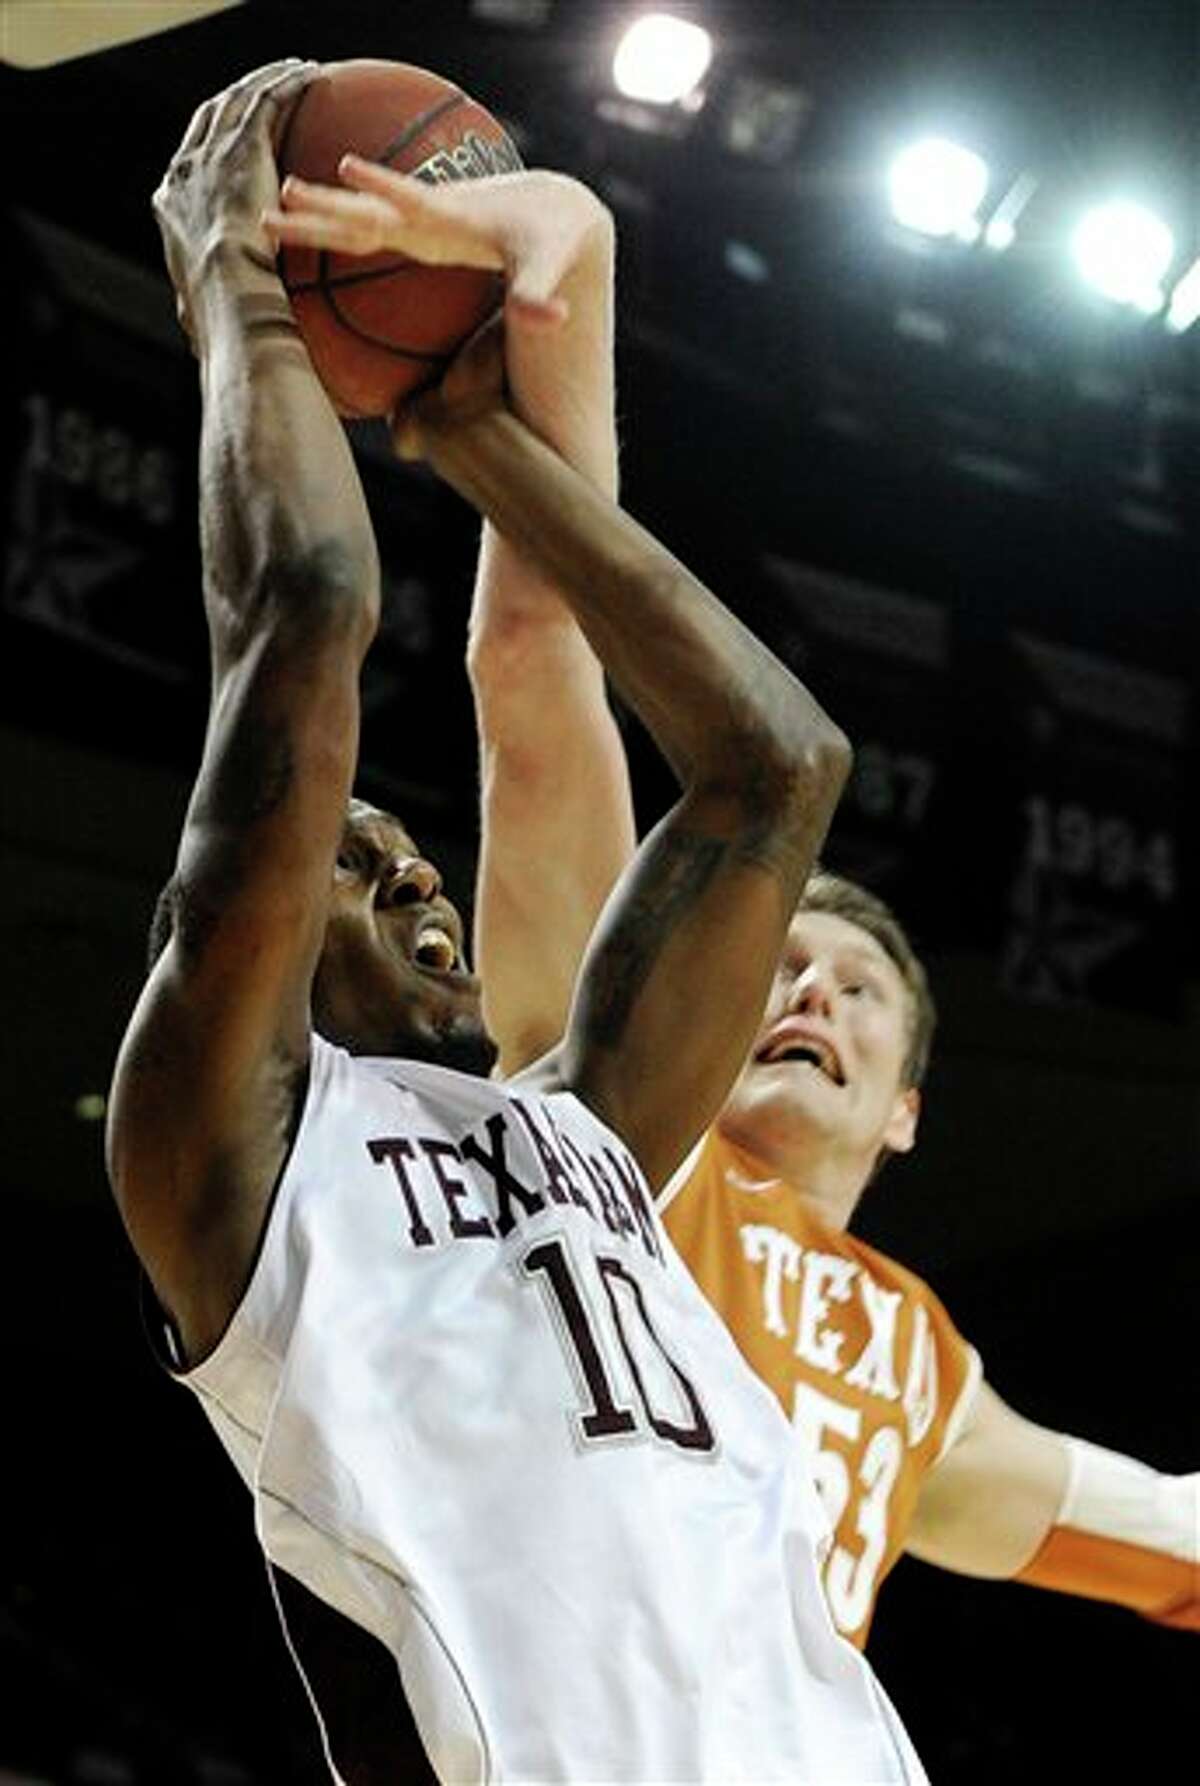 Texas A&M's David Loubeau (10) is fouled by Texas' Clint Chapman (53) in the first half of an NCAA college basketball game Monday, Feb. 6, 2012, in College Station, Texas. (AP Photo/Pat Sullivan)